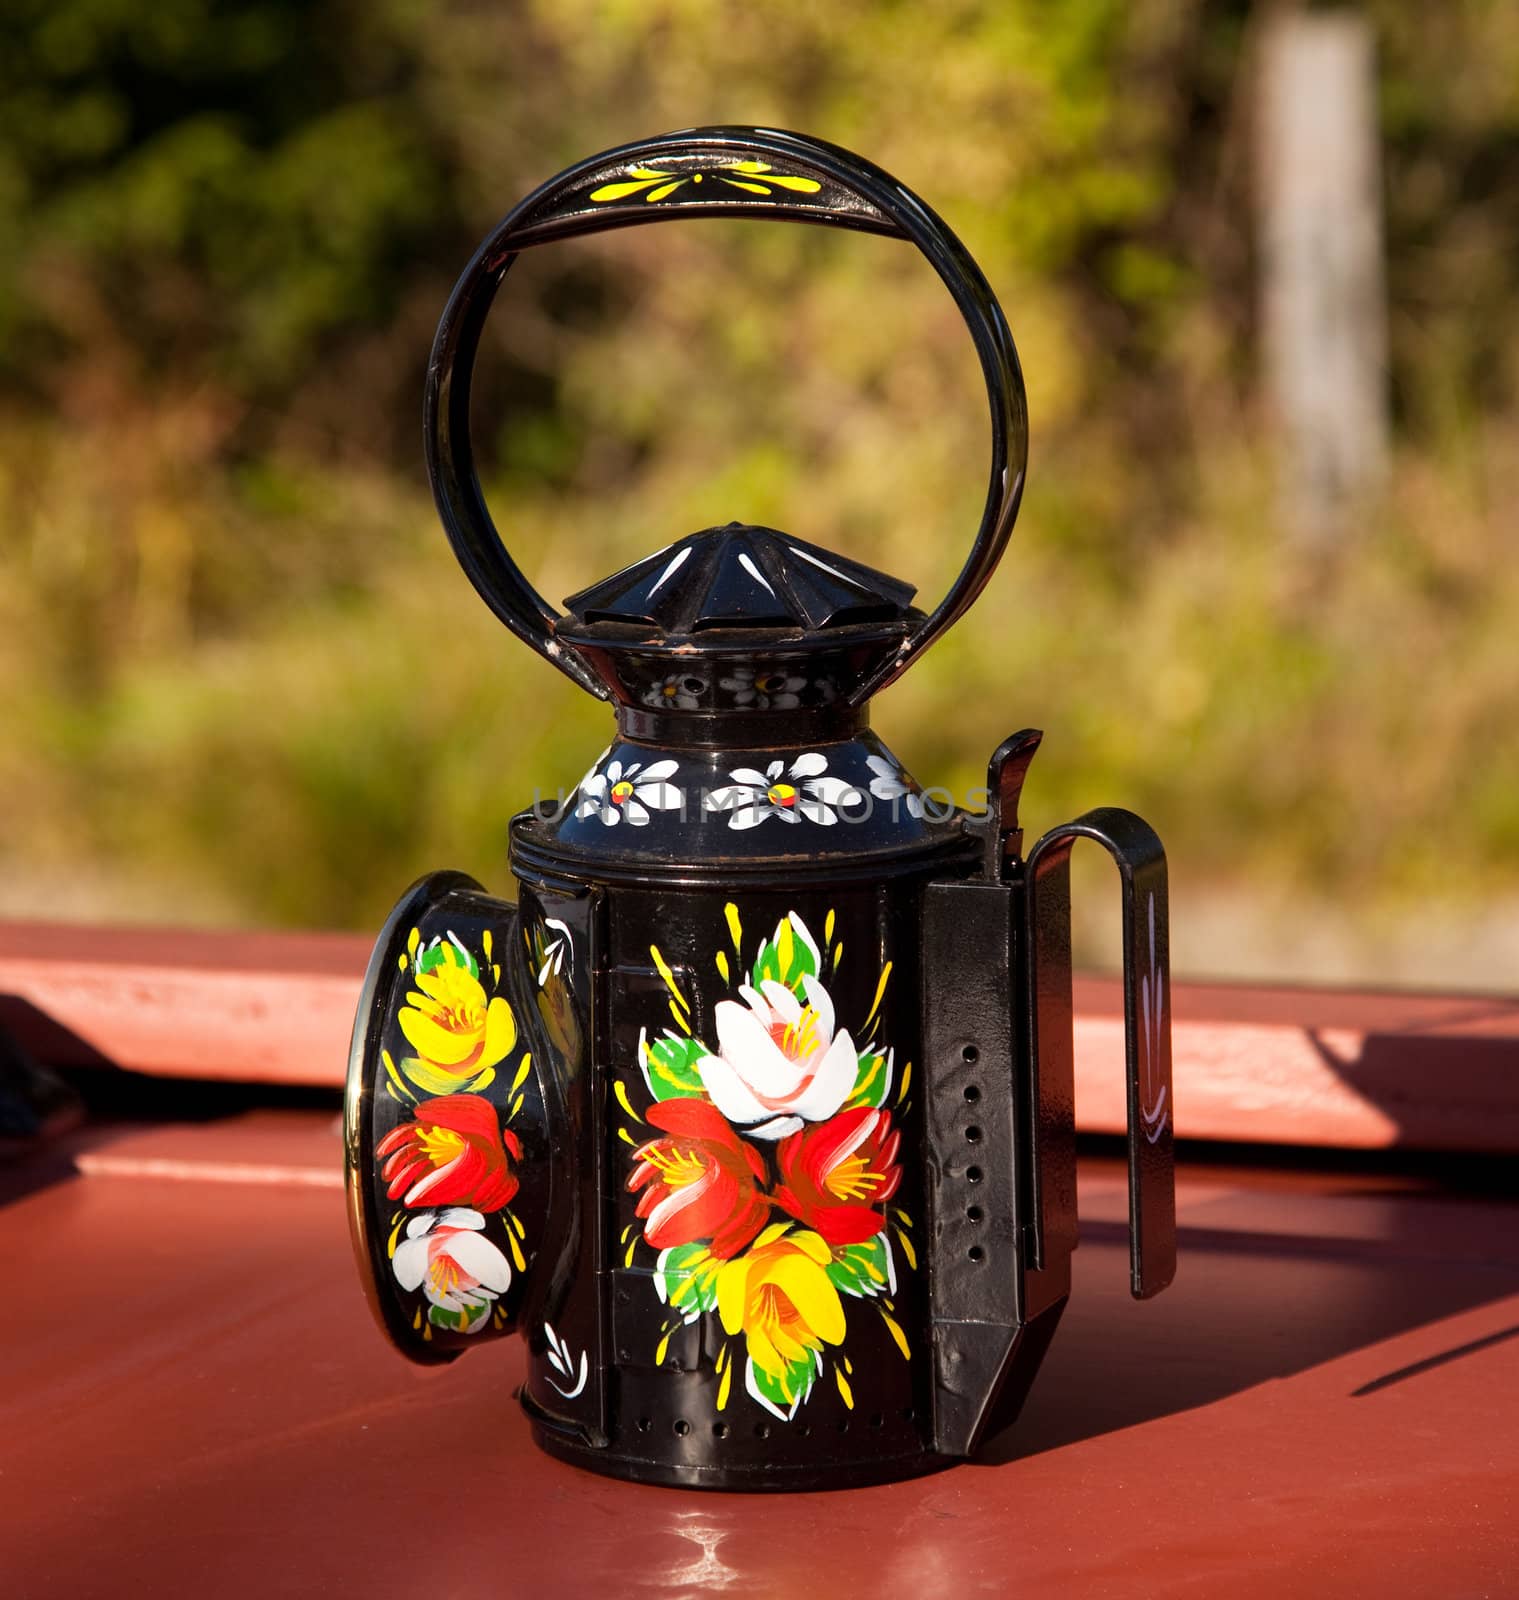 Hand painted traditional decorated oil lamp by steheap